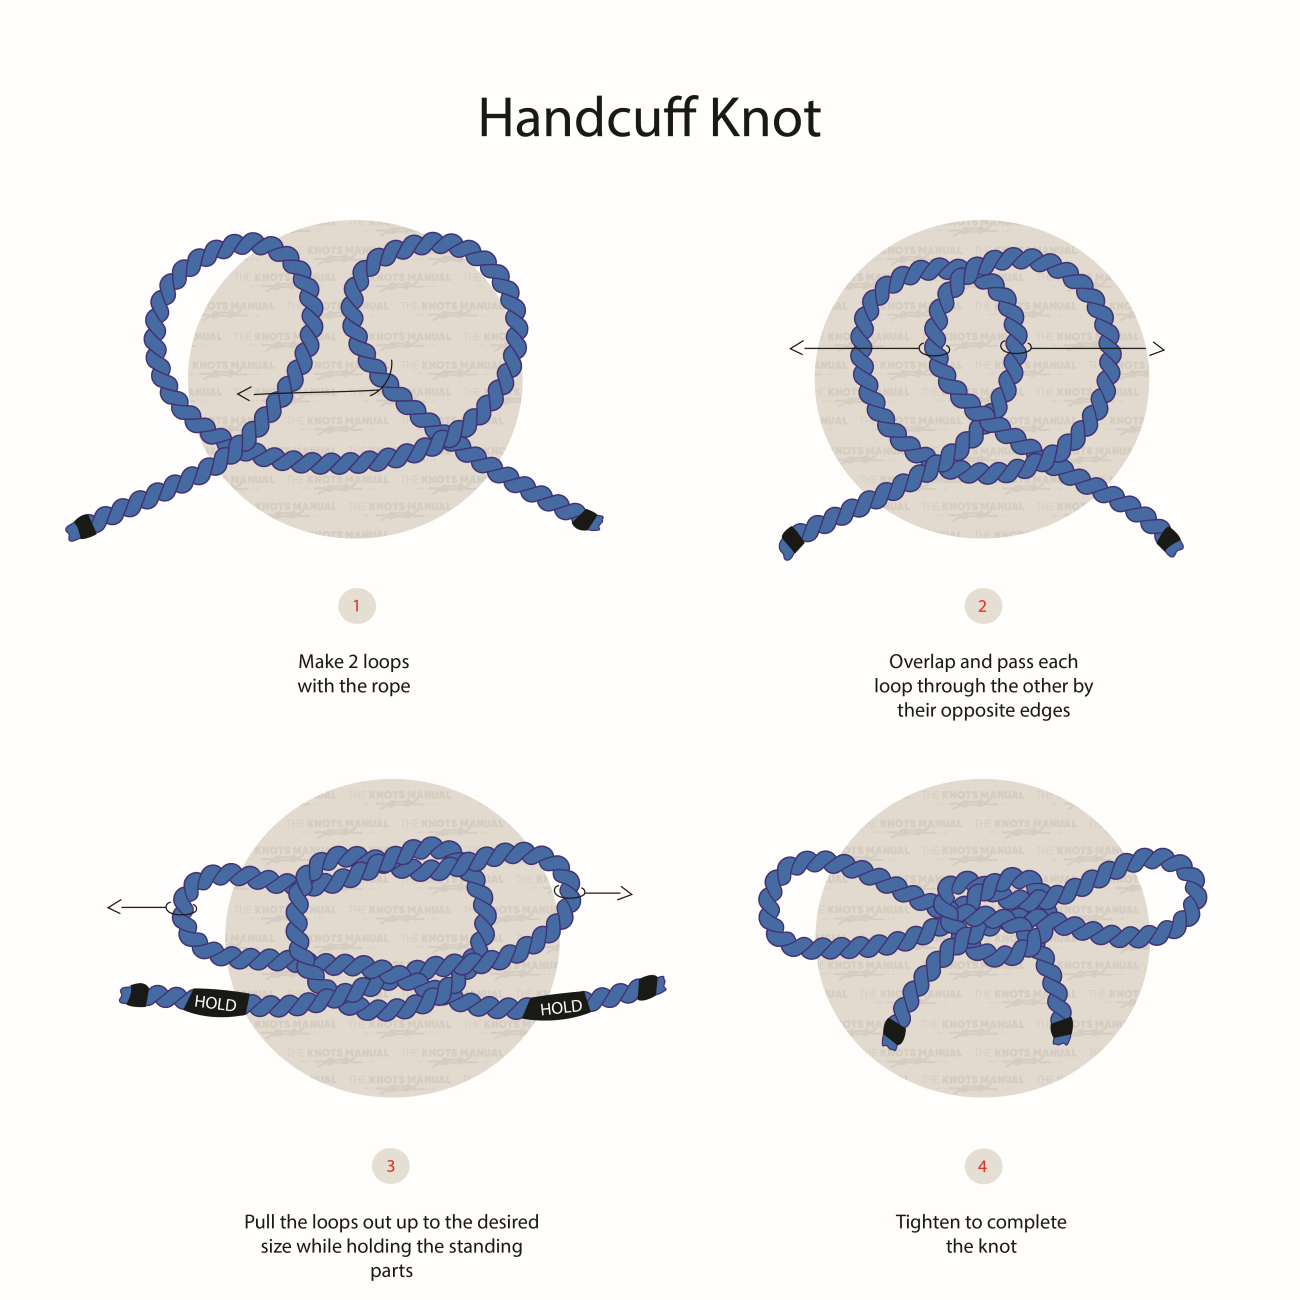 How To Tie The Handcuff Knot - The Knots Manual